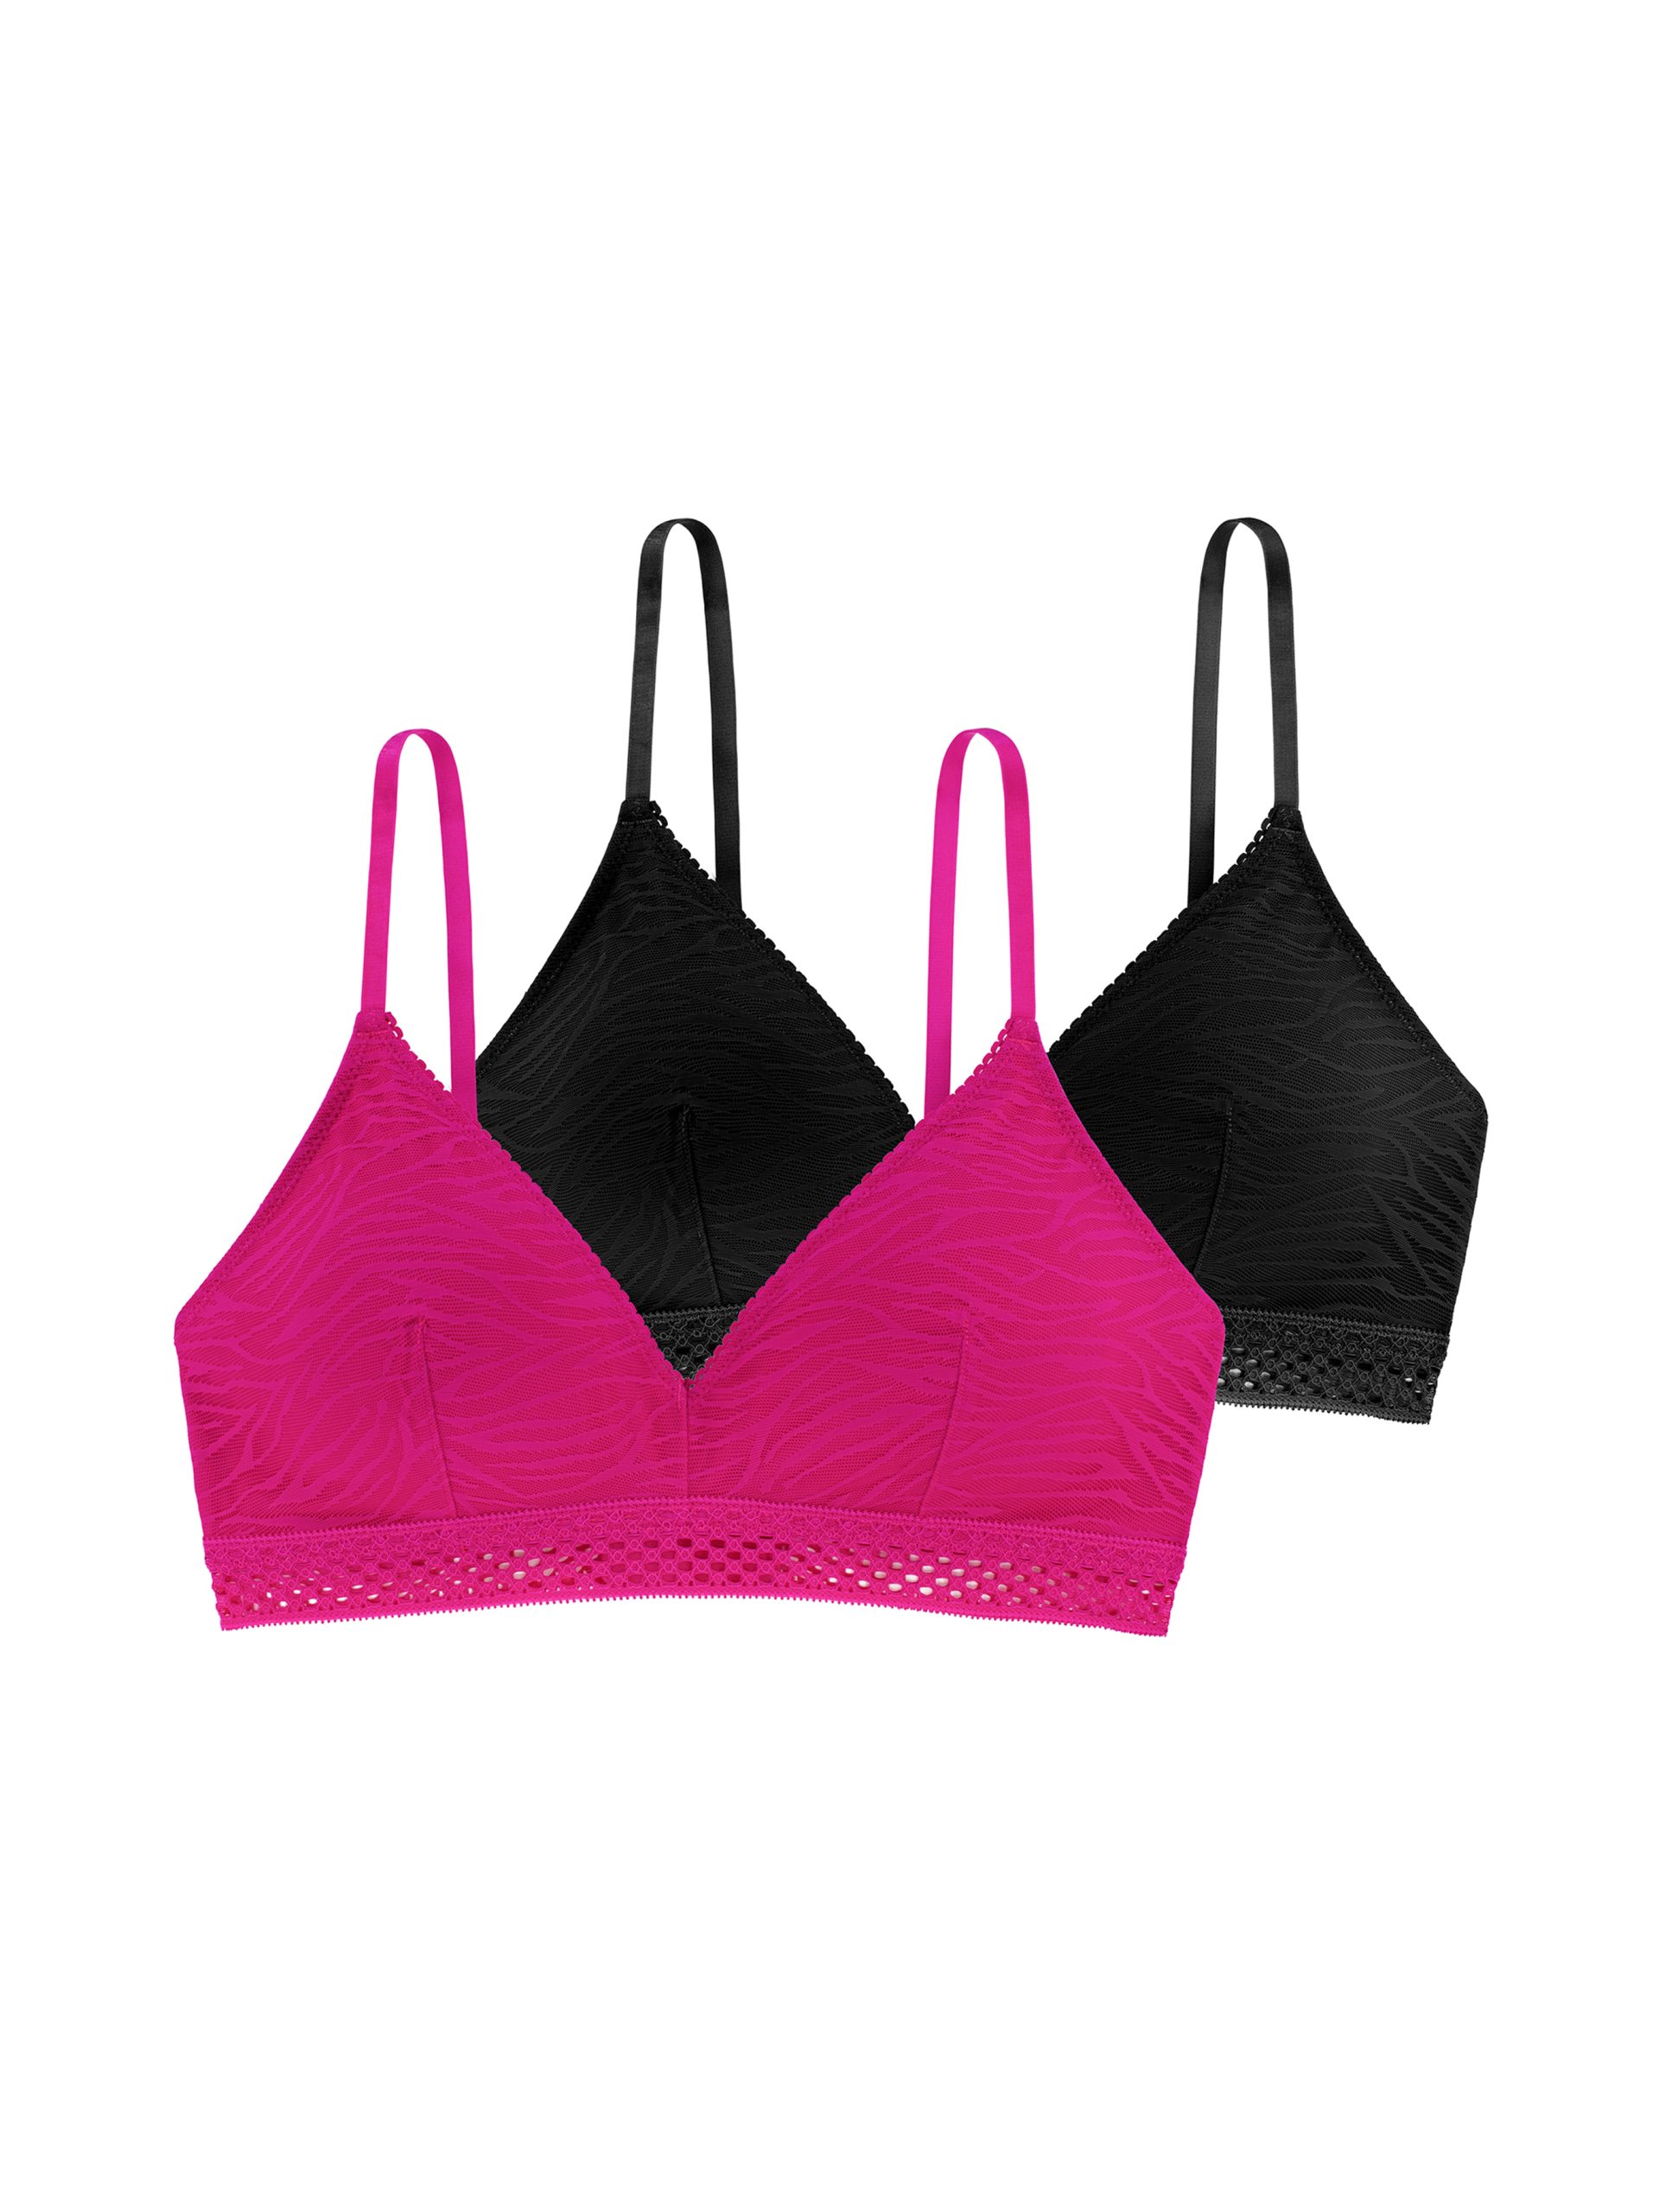 prAna - // Licidia Bra Top Made with Recycled Polyester & Fair Trade  Certified™ Factory Available in 2 colors, Sizes XS - XL Shop:  bit.ly/3dzQca3